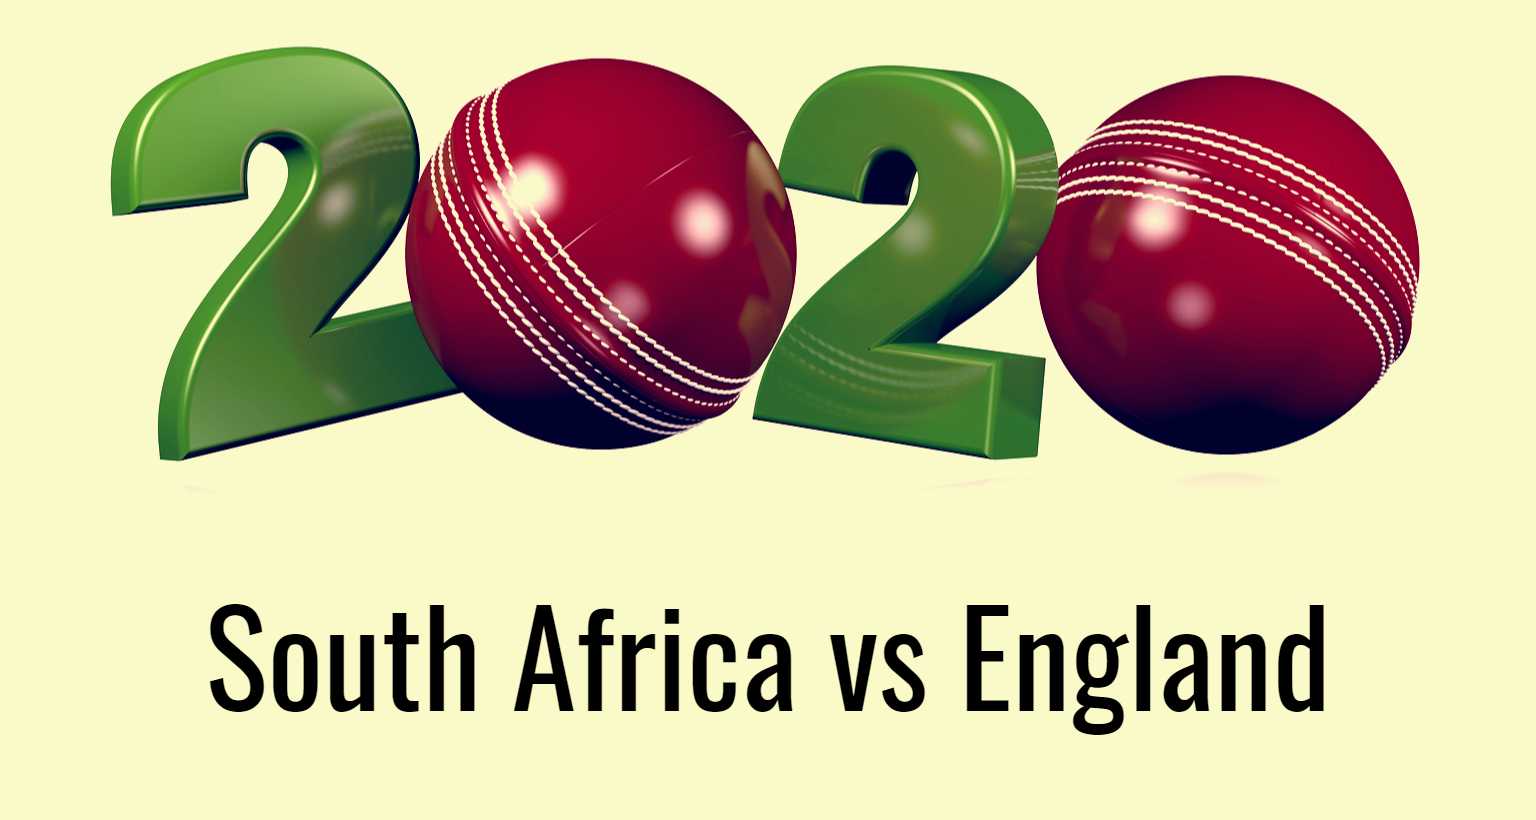 South Africa plays England in ICC Cricket Championships